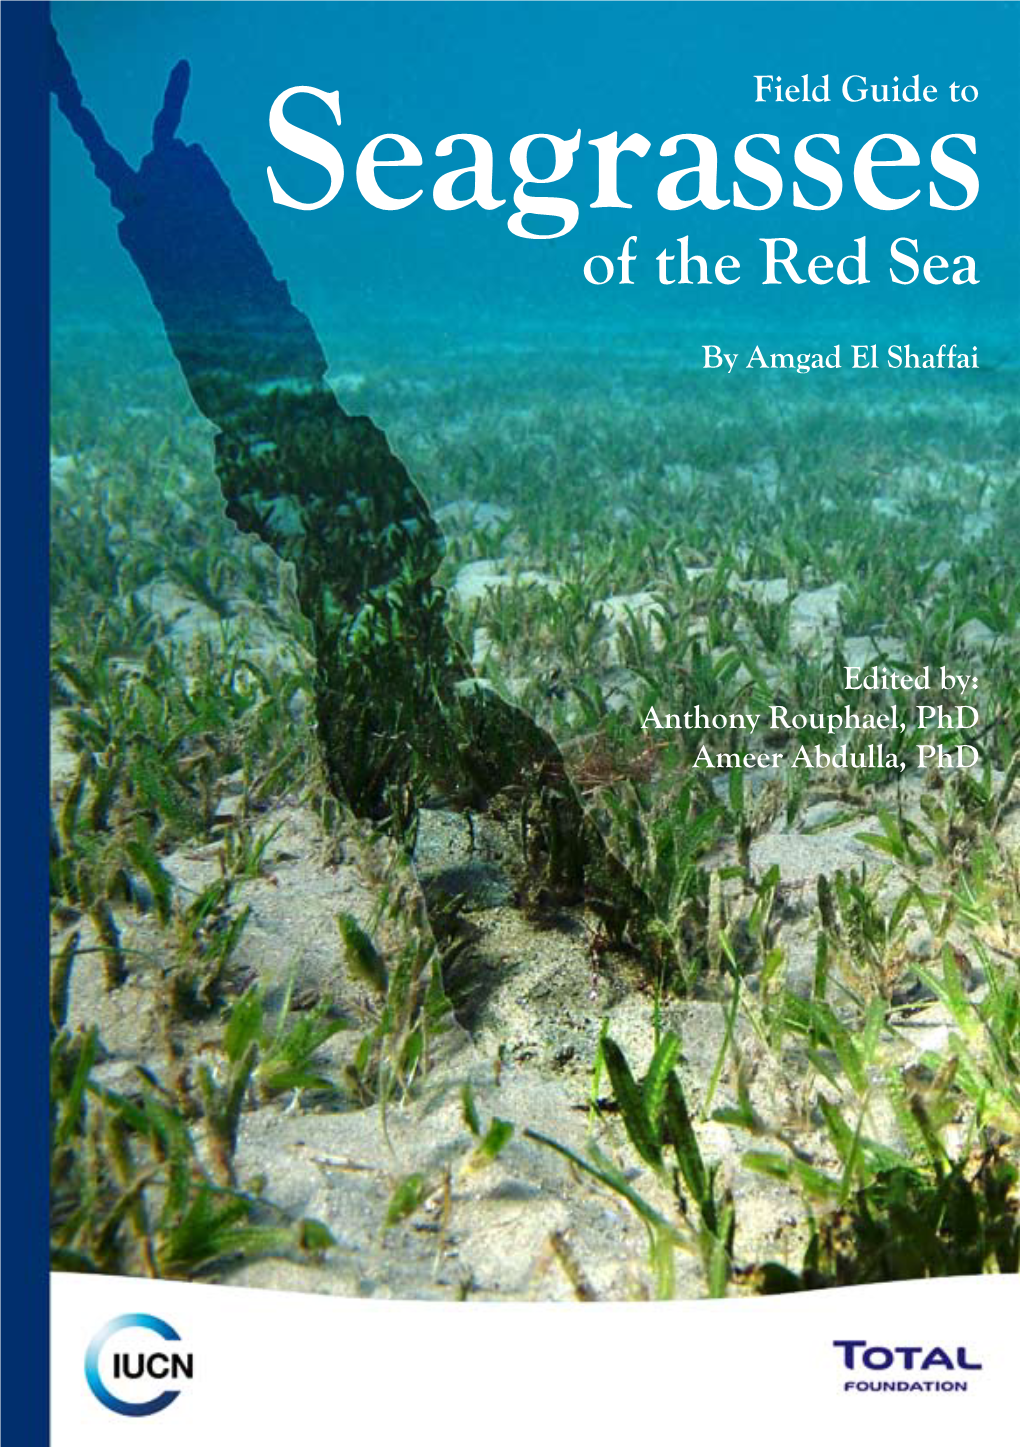 Of the Red Sea